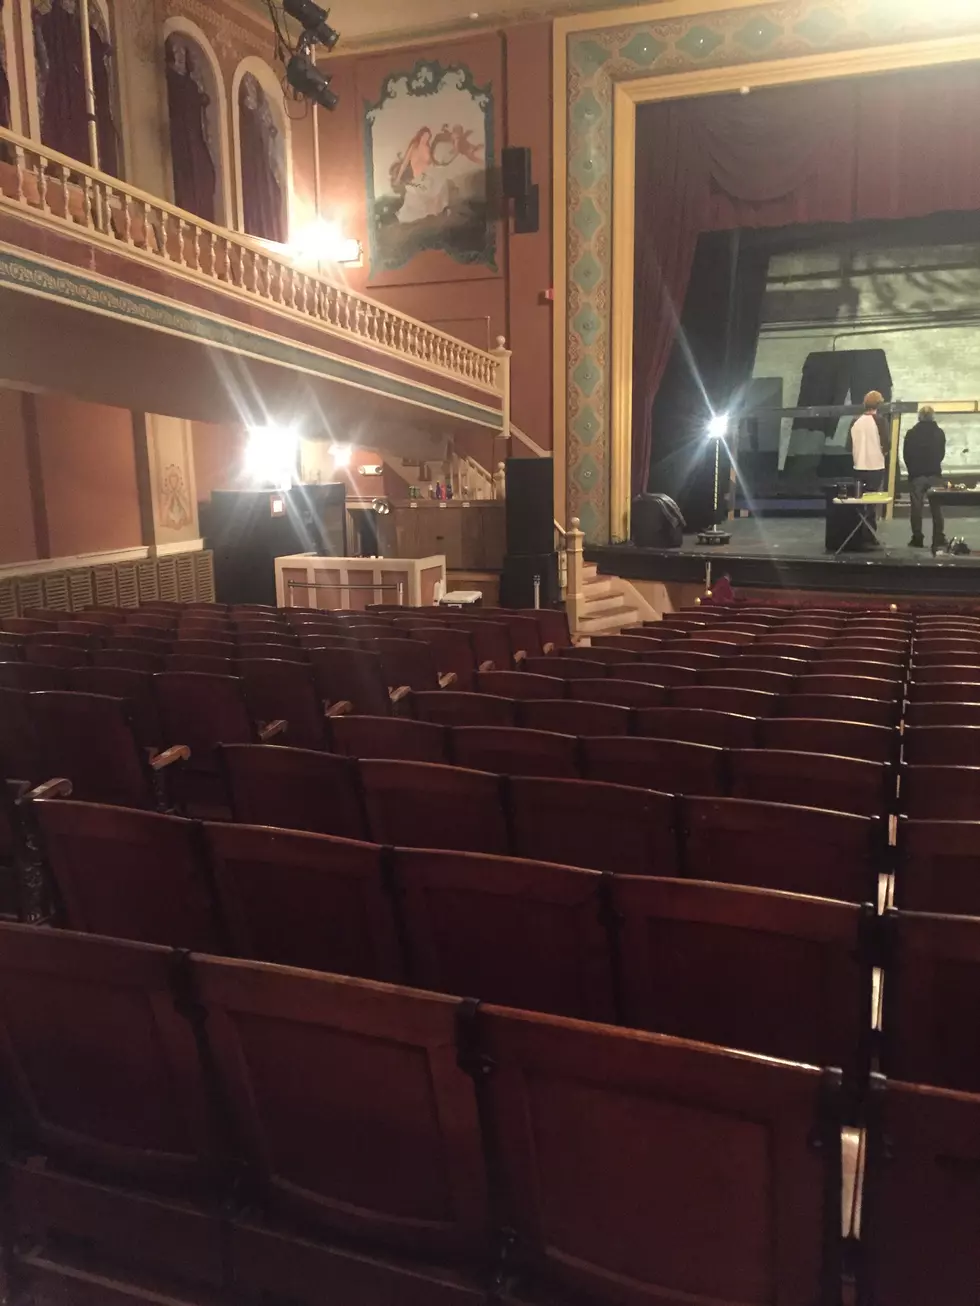 You've Never Seen This Part of the Rochester Opera House Before